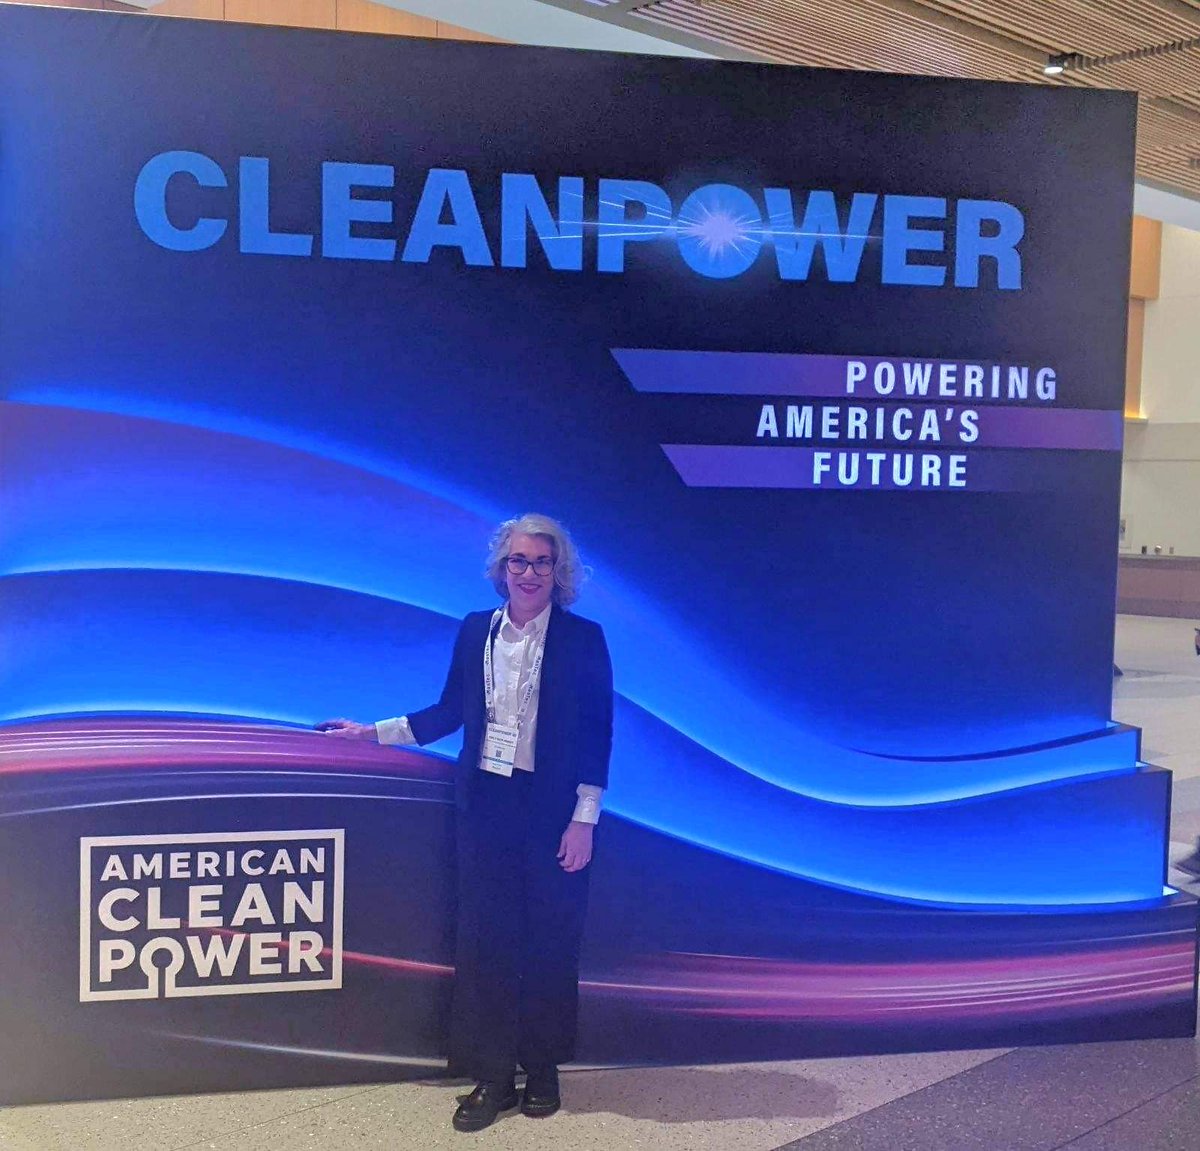 Our fantastic hostess, on behalf of our client at #CleanPower2024, is in Minneapolis, MN.
.
.
#CleanPower #minneapolisminnesota #boothhostess #tradeshowprofessional #professionalteam #kpgeventservices